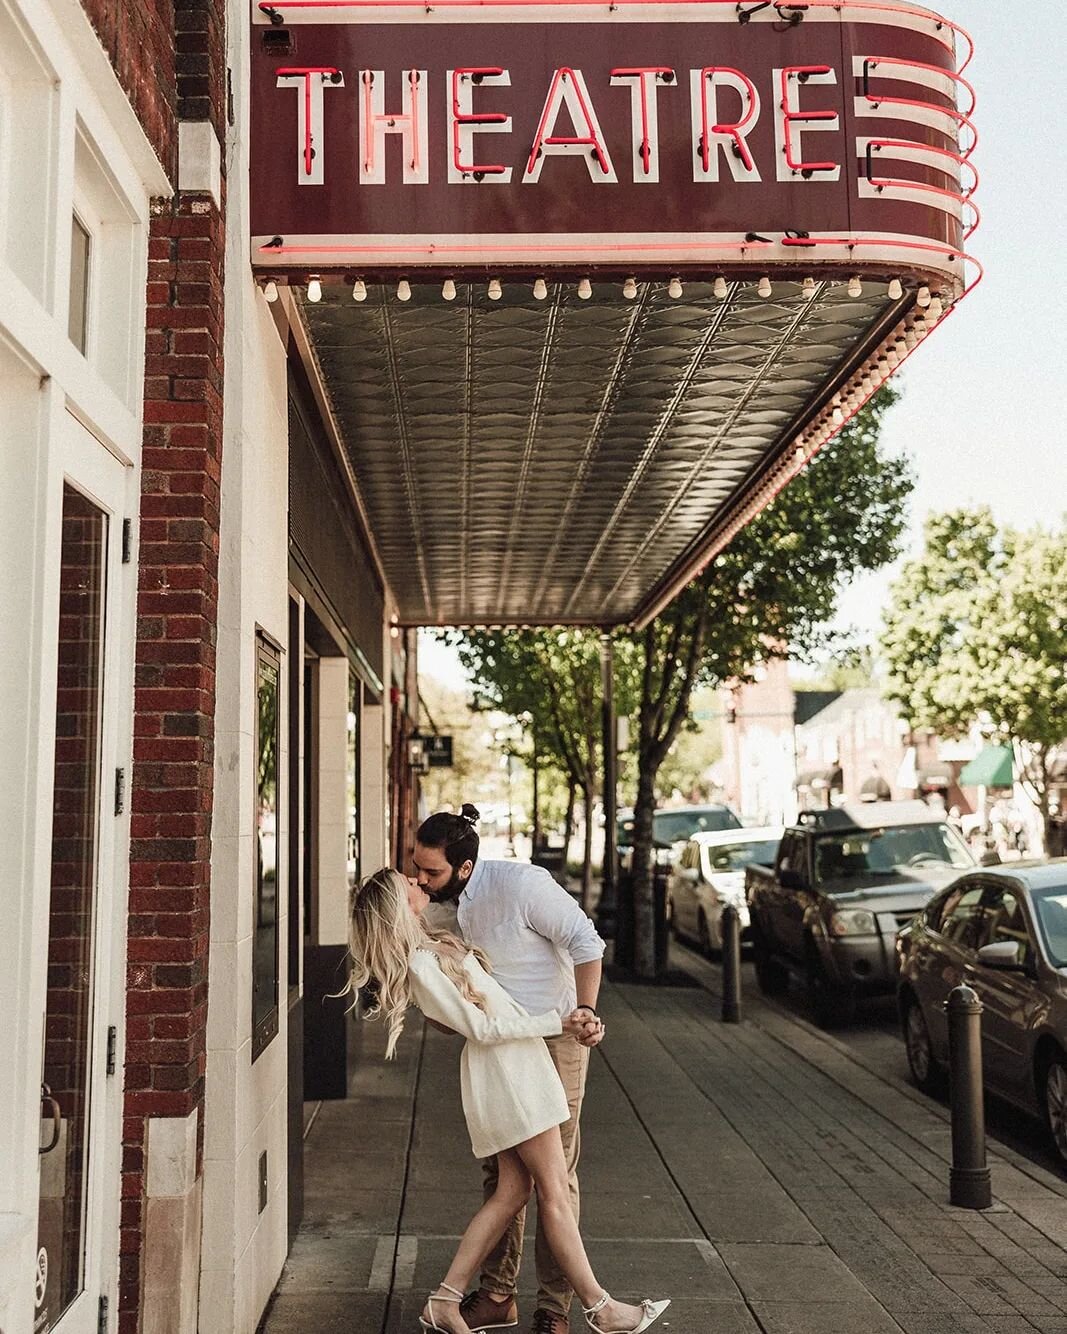 This cute couple has happy memories at the movie theatre. We love to photograph places and things that represent you as a couple.